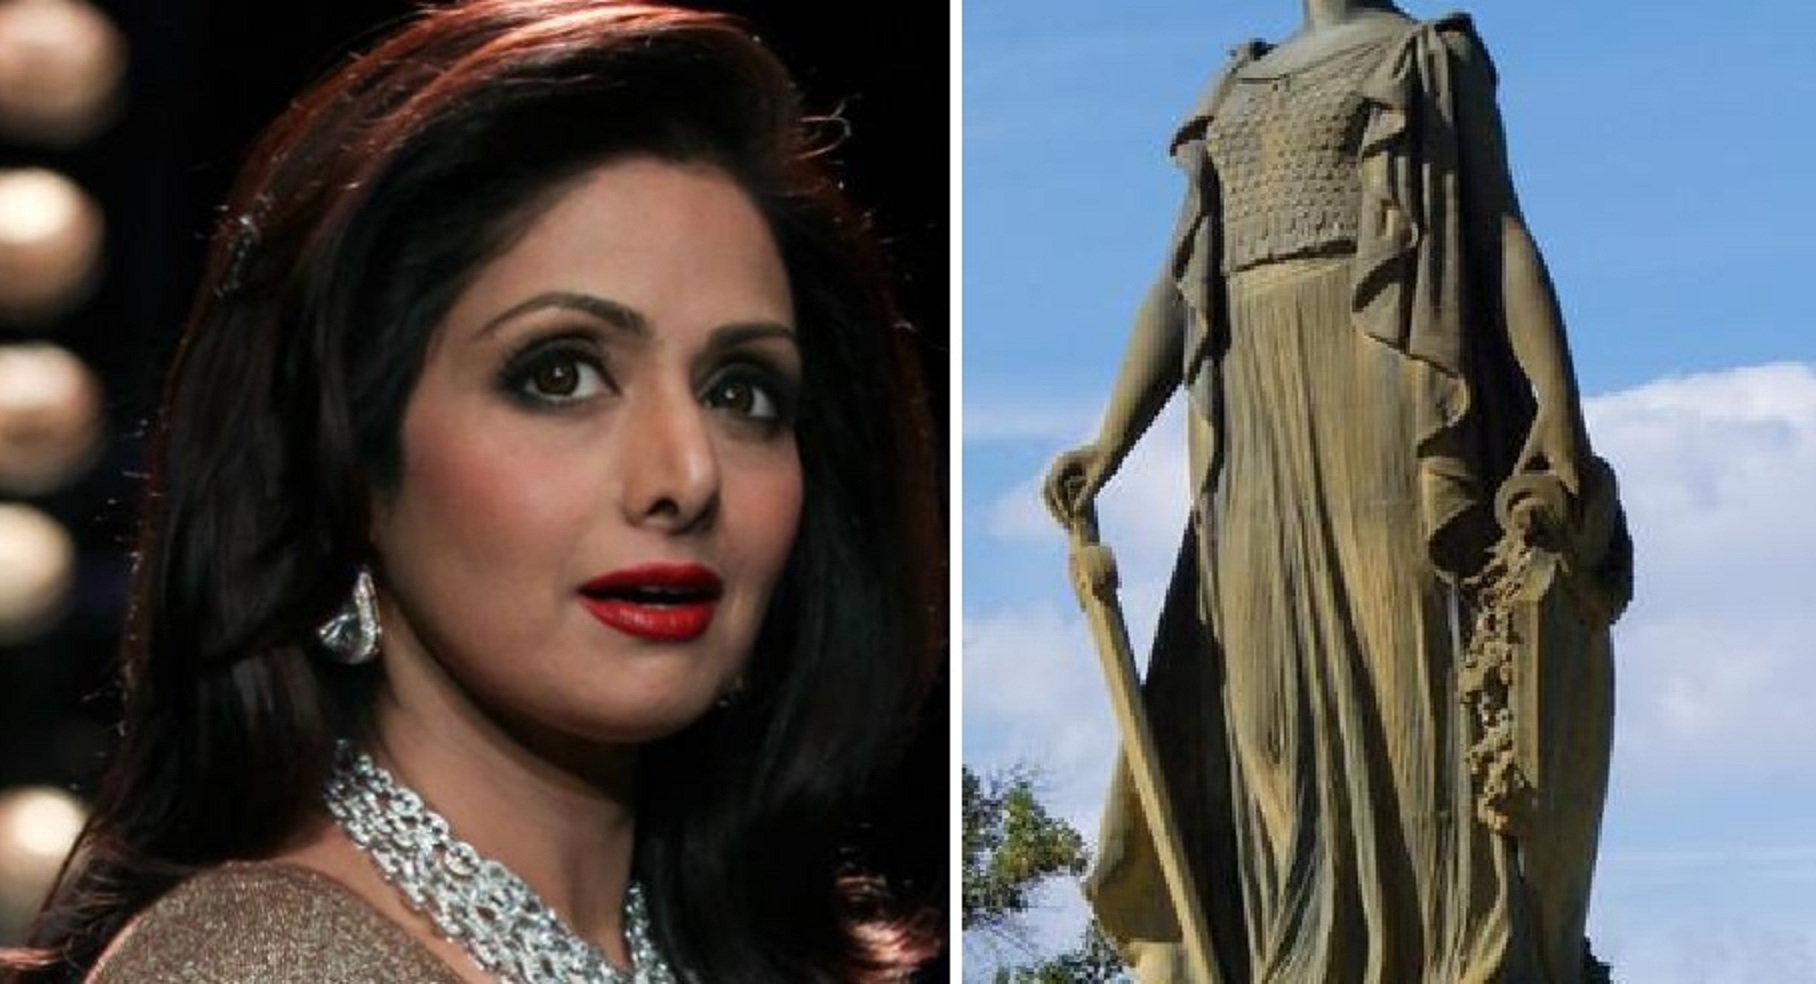 Switzerland to Erect a Statue of Sridevi in Her Honor!